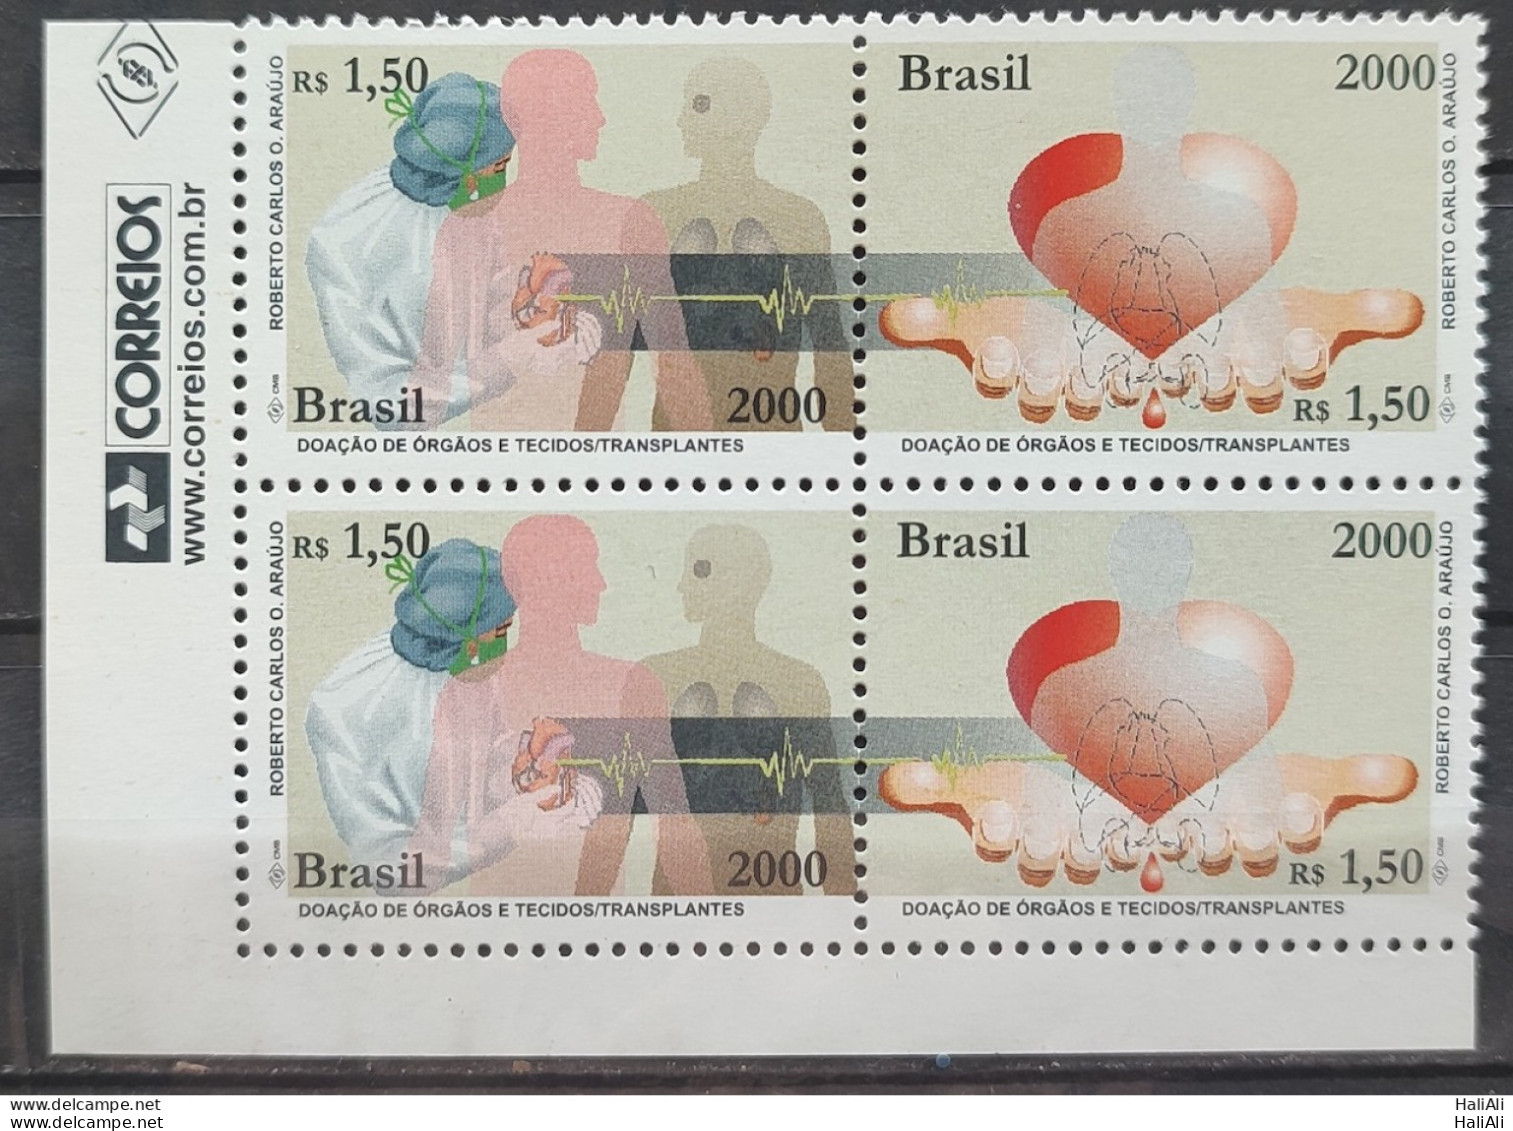 C 2341 Brazil Stamp Donation Of Organ And Tissues Science Health 2000 Block Of 4 Vignette Post Office - Nuovi